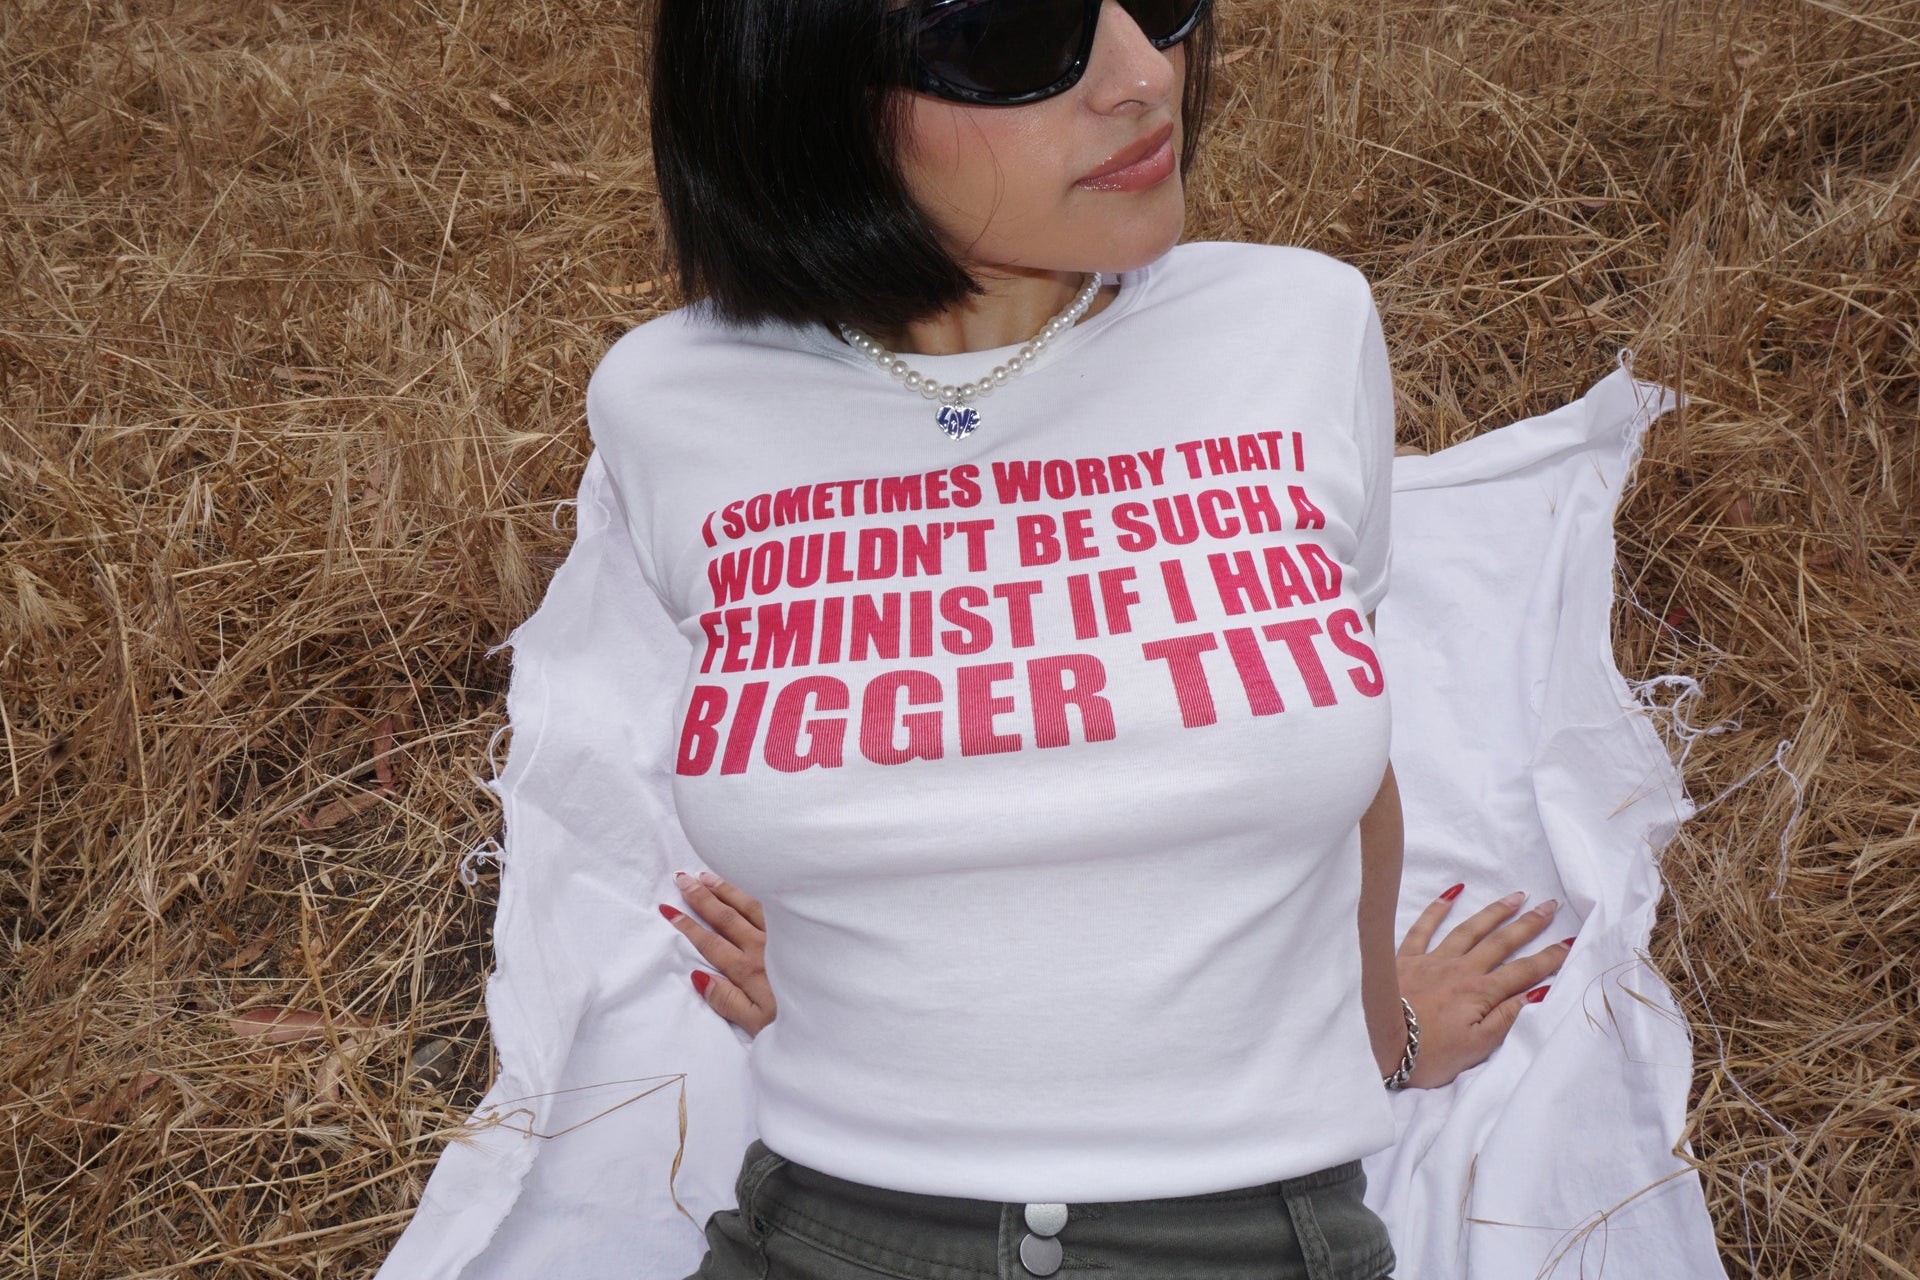 I sometimes worry I wouldn't be such a feminist if I had bigger tits fitted baby tee